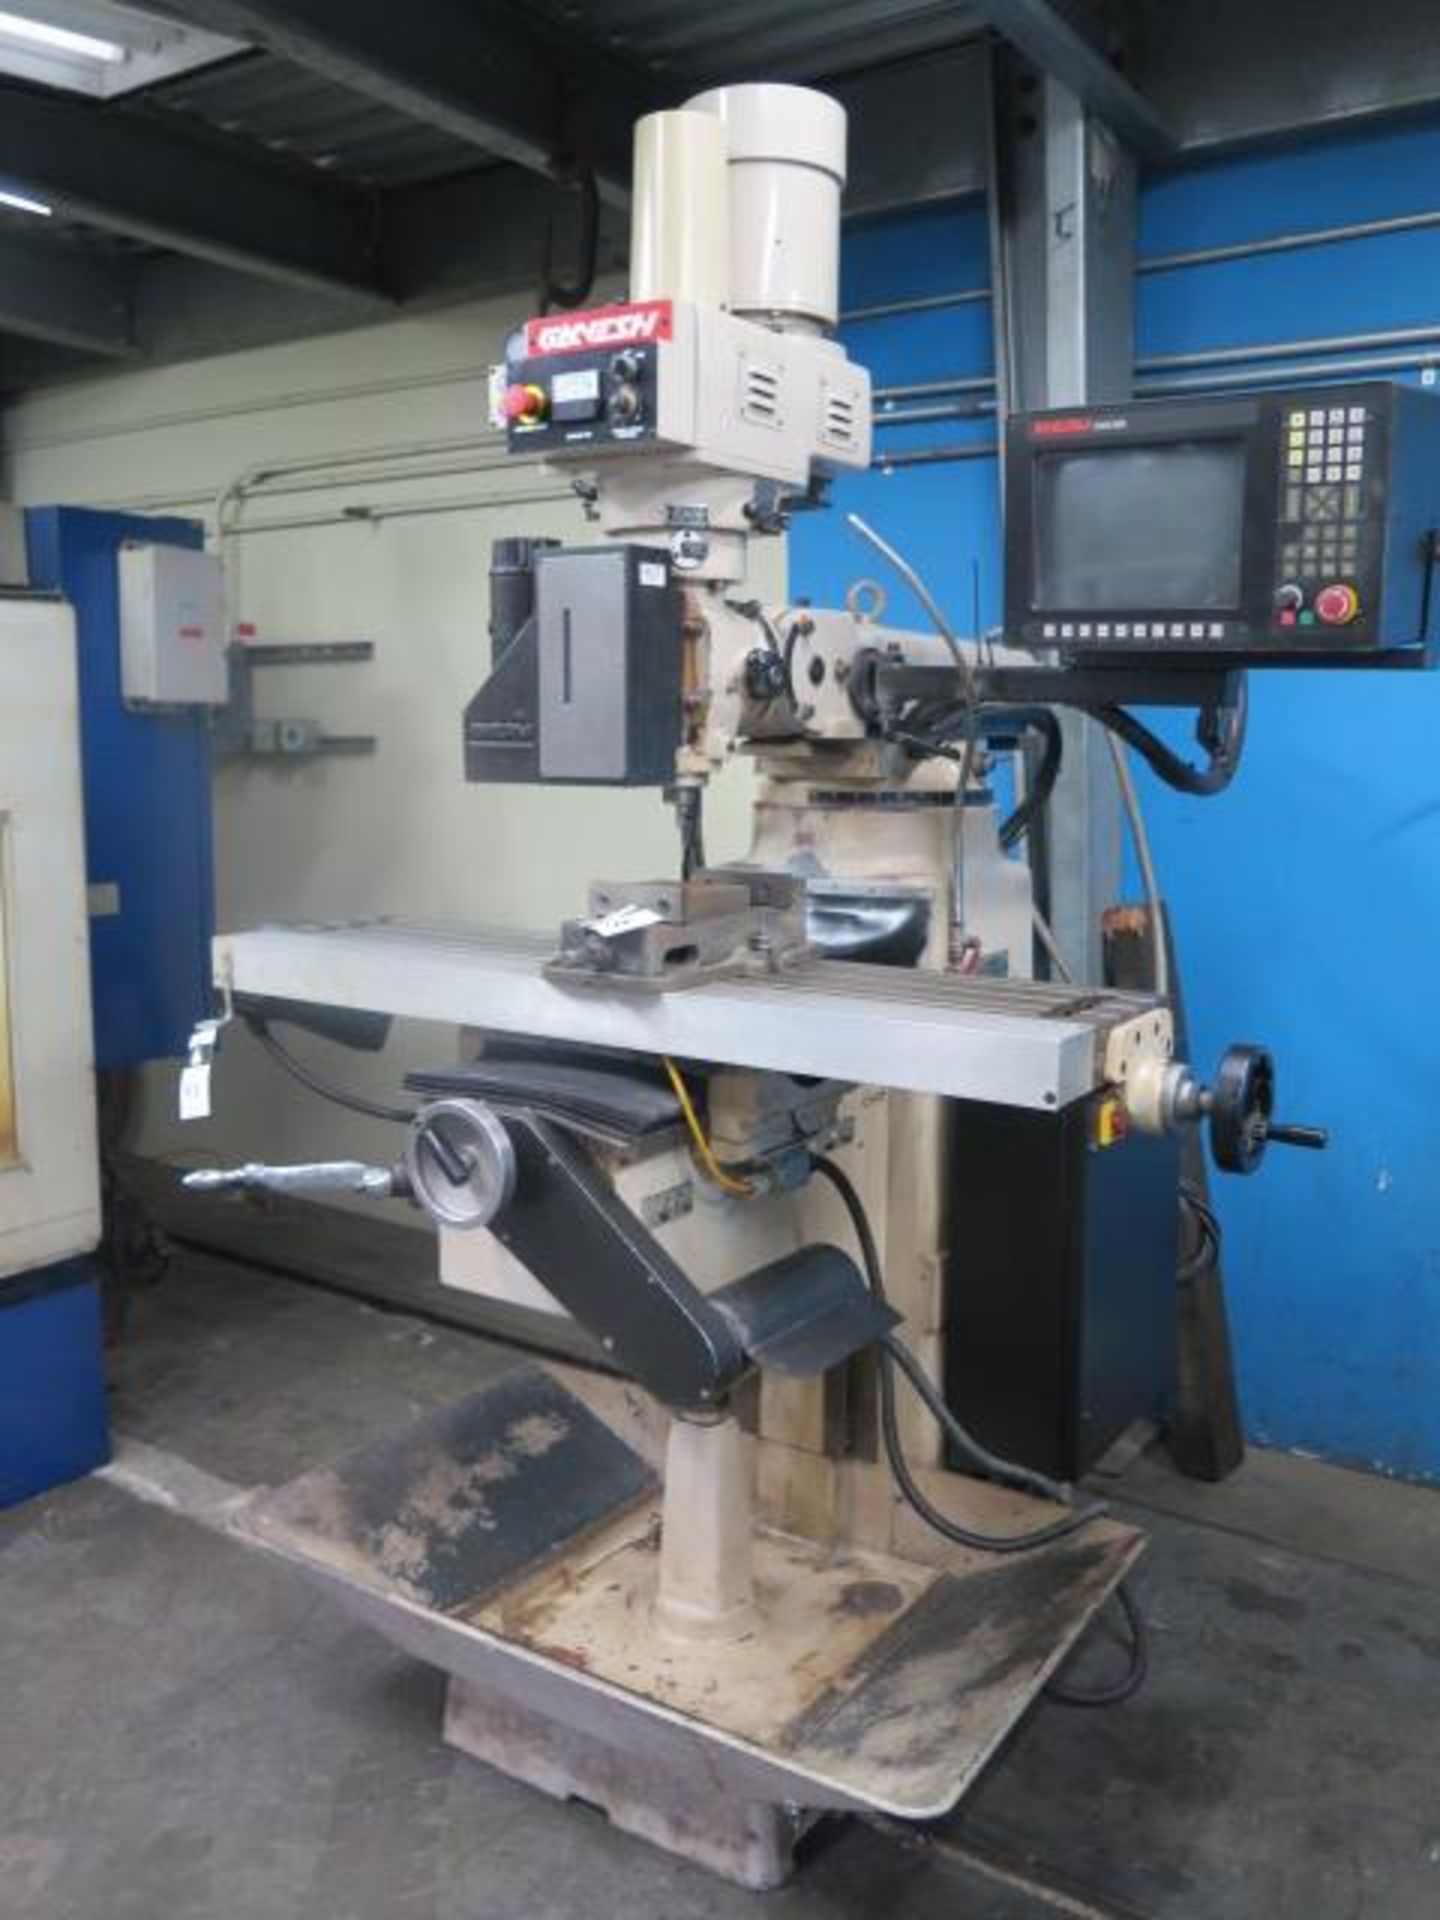 2000 Ganesh Deluxe GMV-3 3-Axis CNC Vertical Mill s/n 11617 w/ Anilam 3300 MK Controls, SOLD AS IS - Image 2 of 15